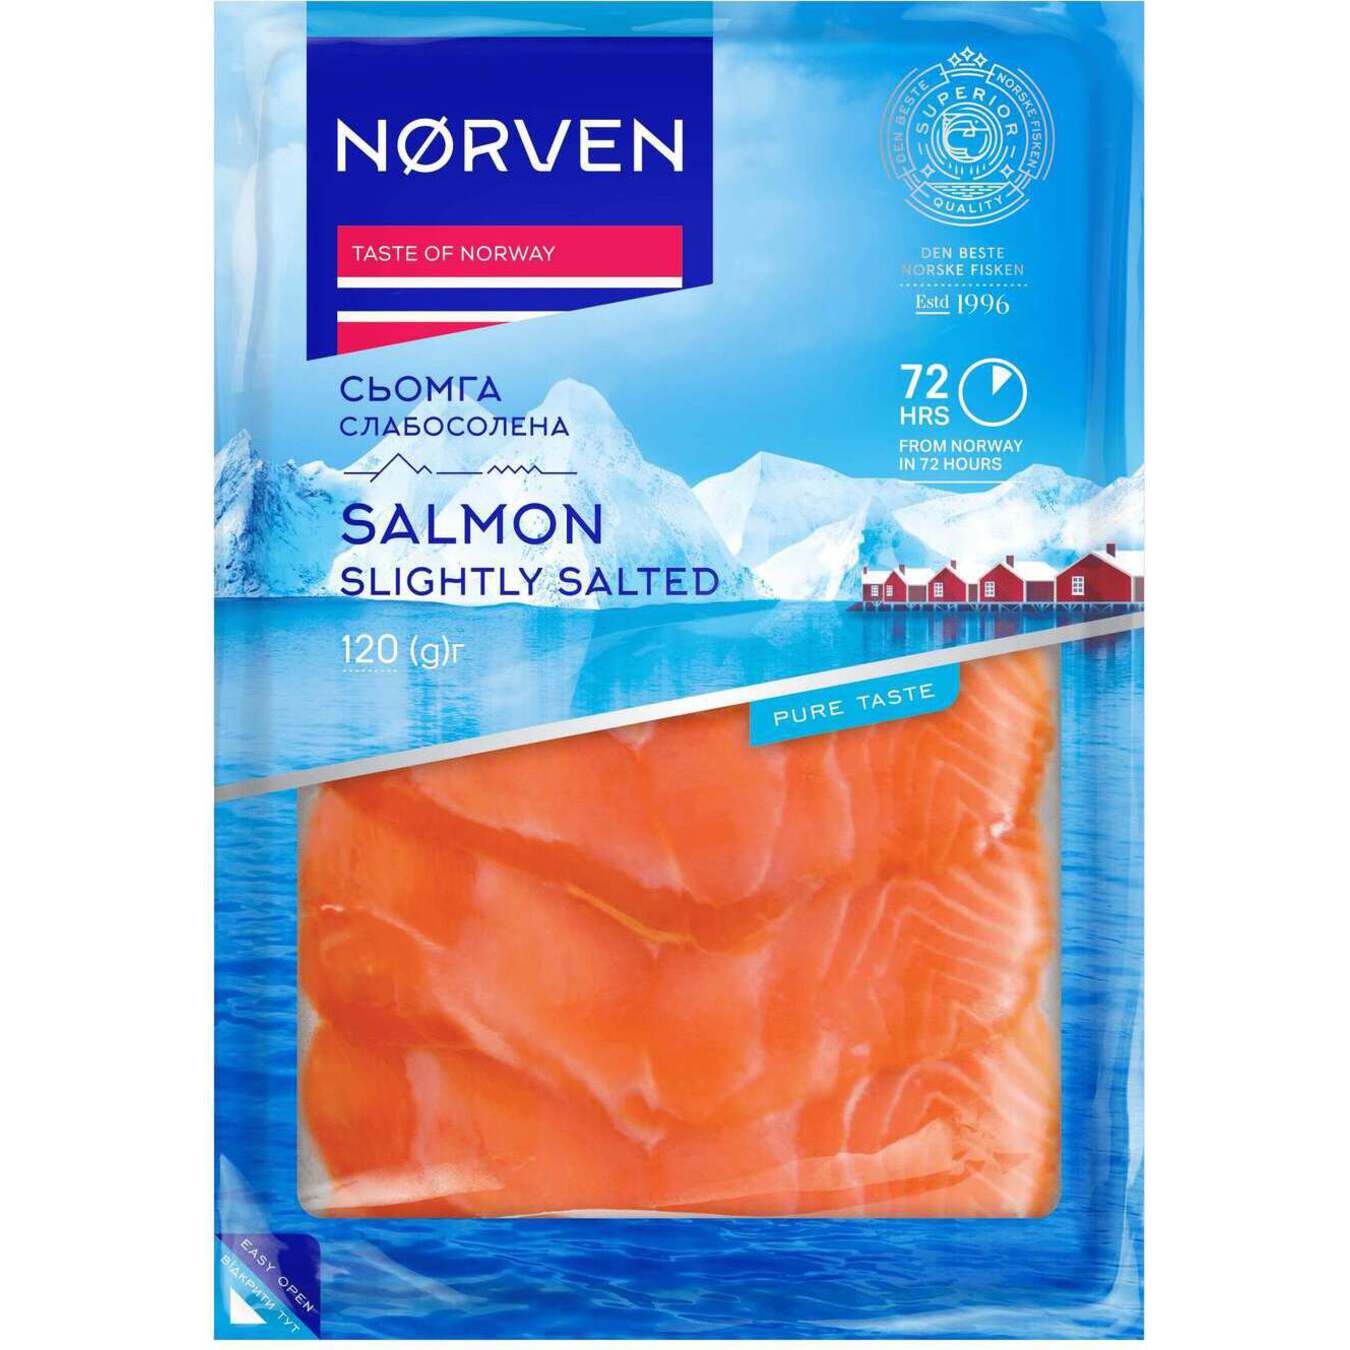 Norven Salmon lightly salted cut 120g